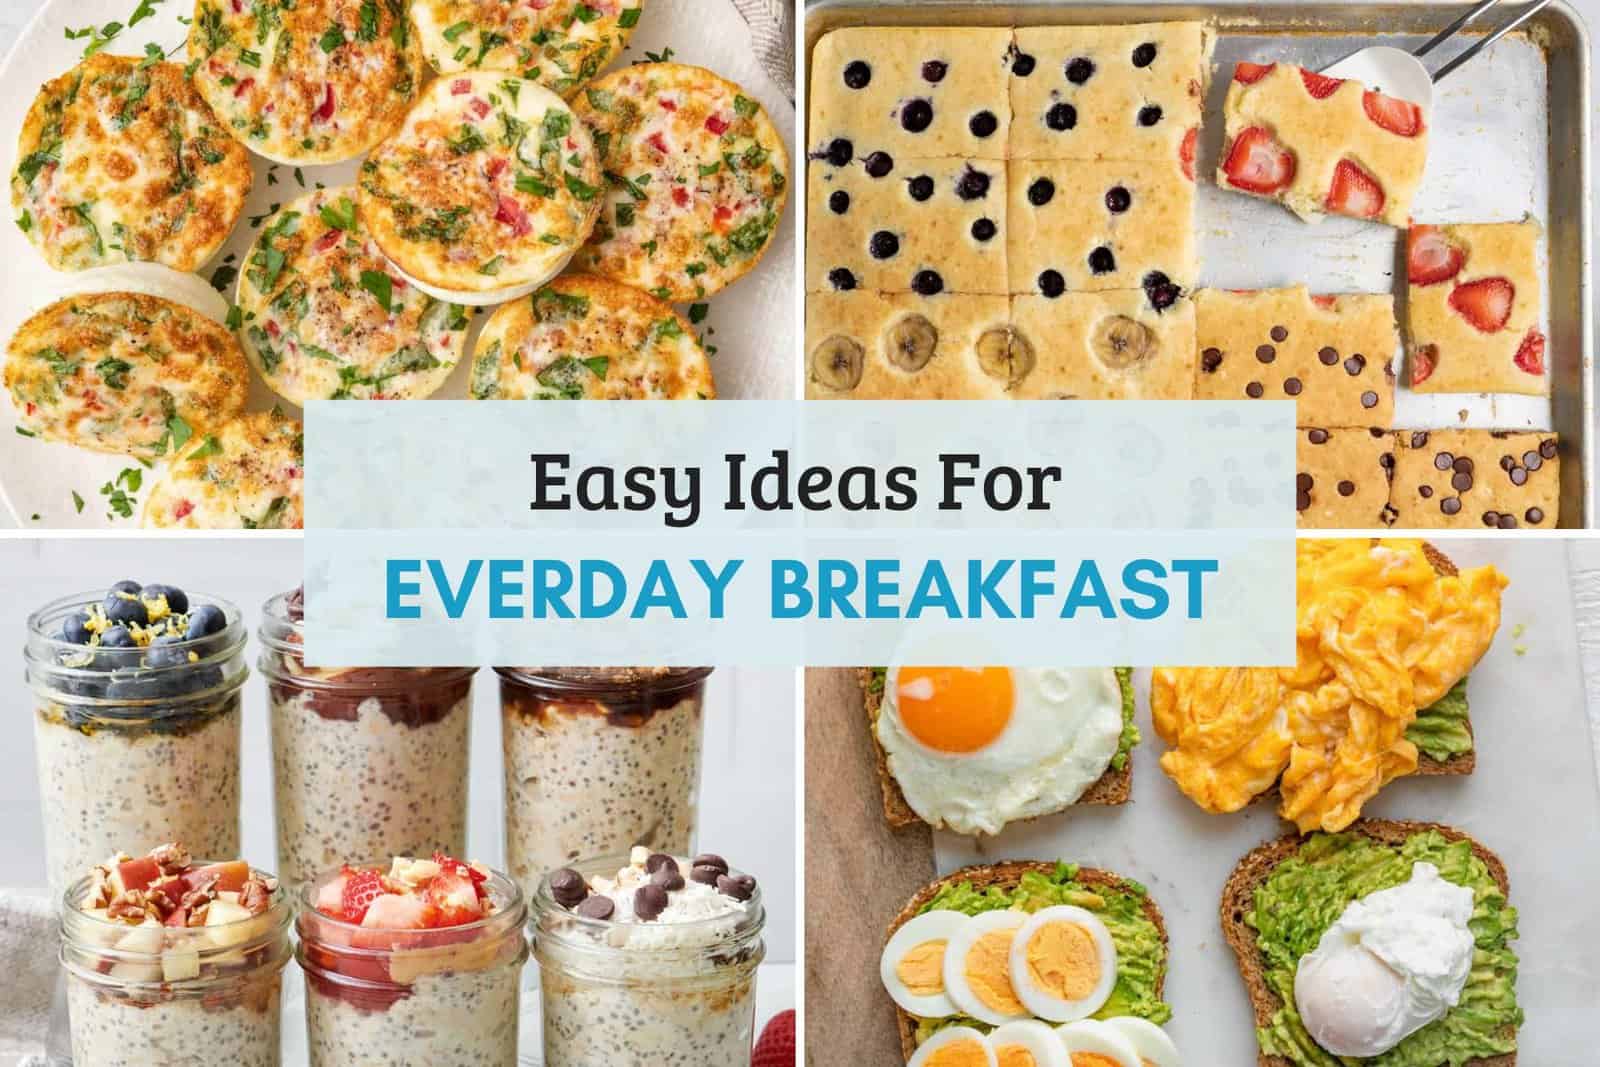 Collage of images for everyday breakfast recipes to try